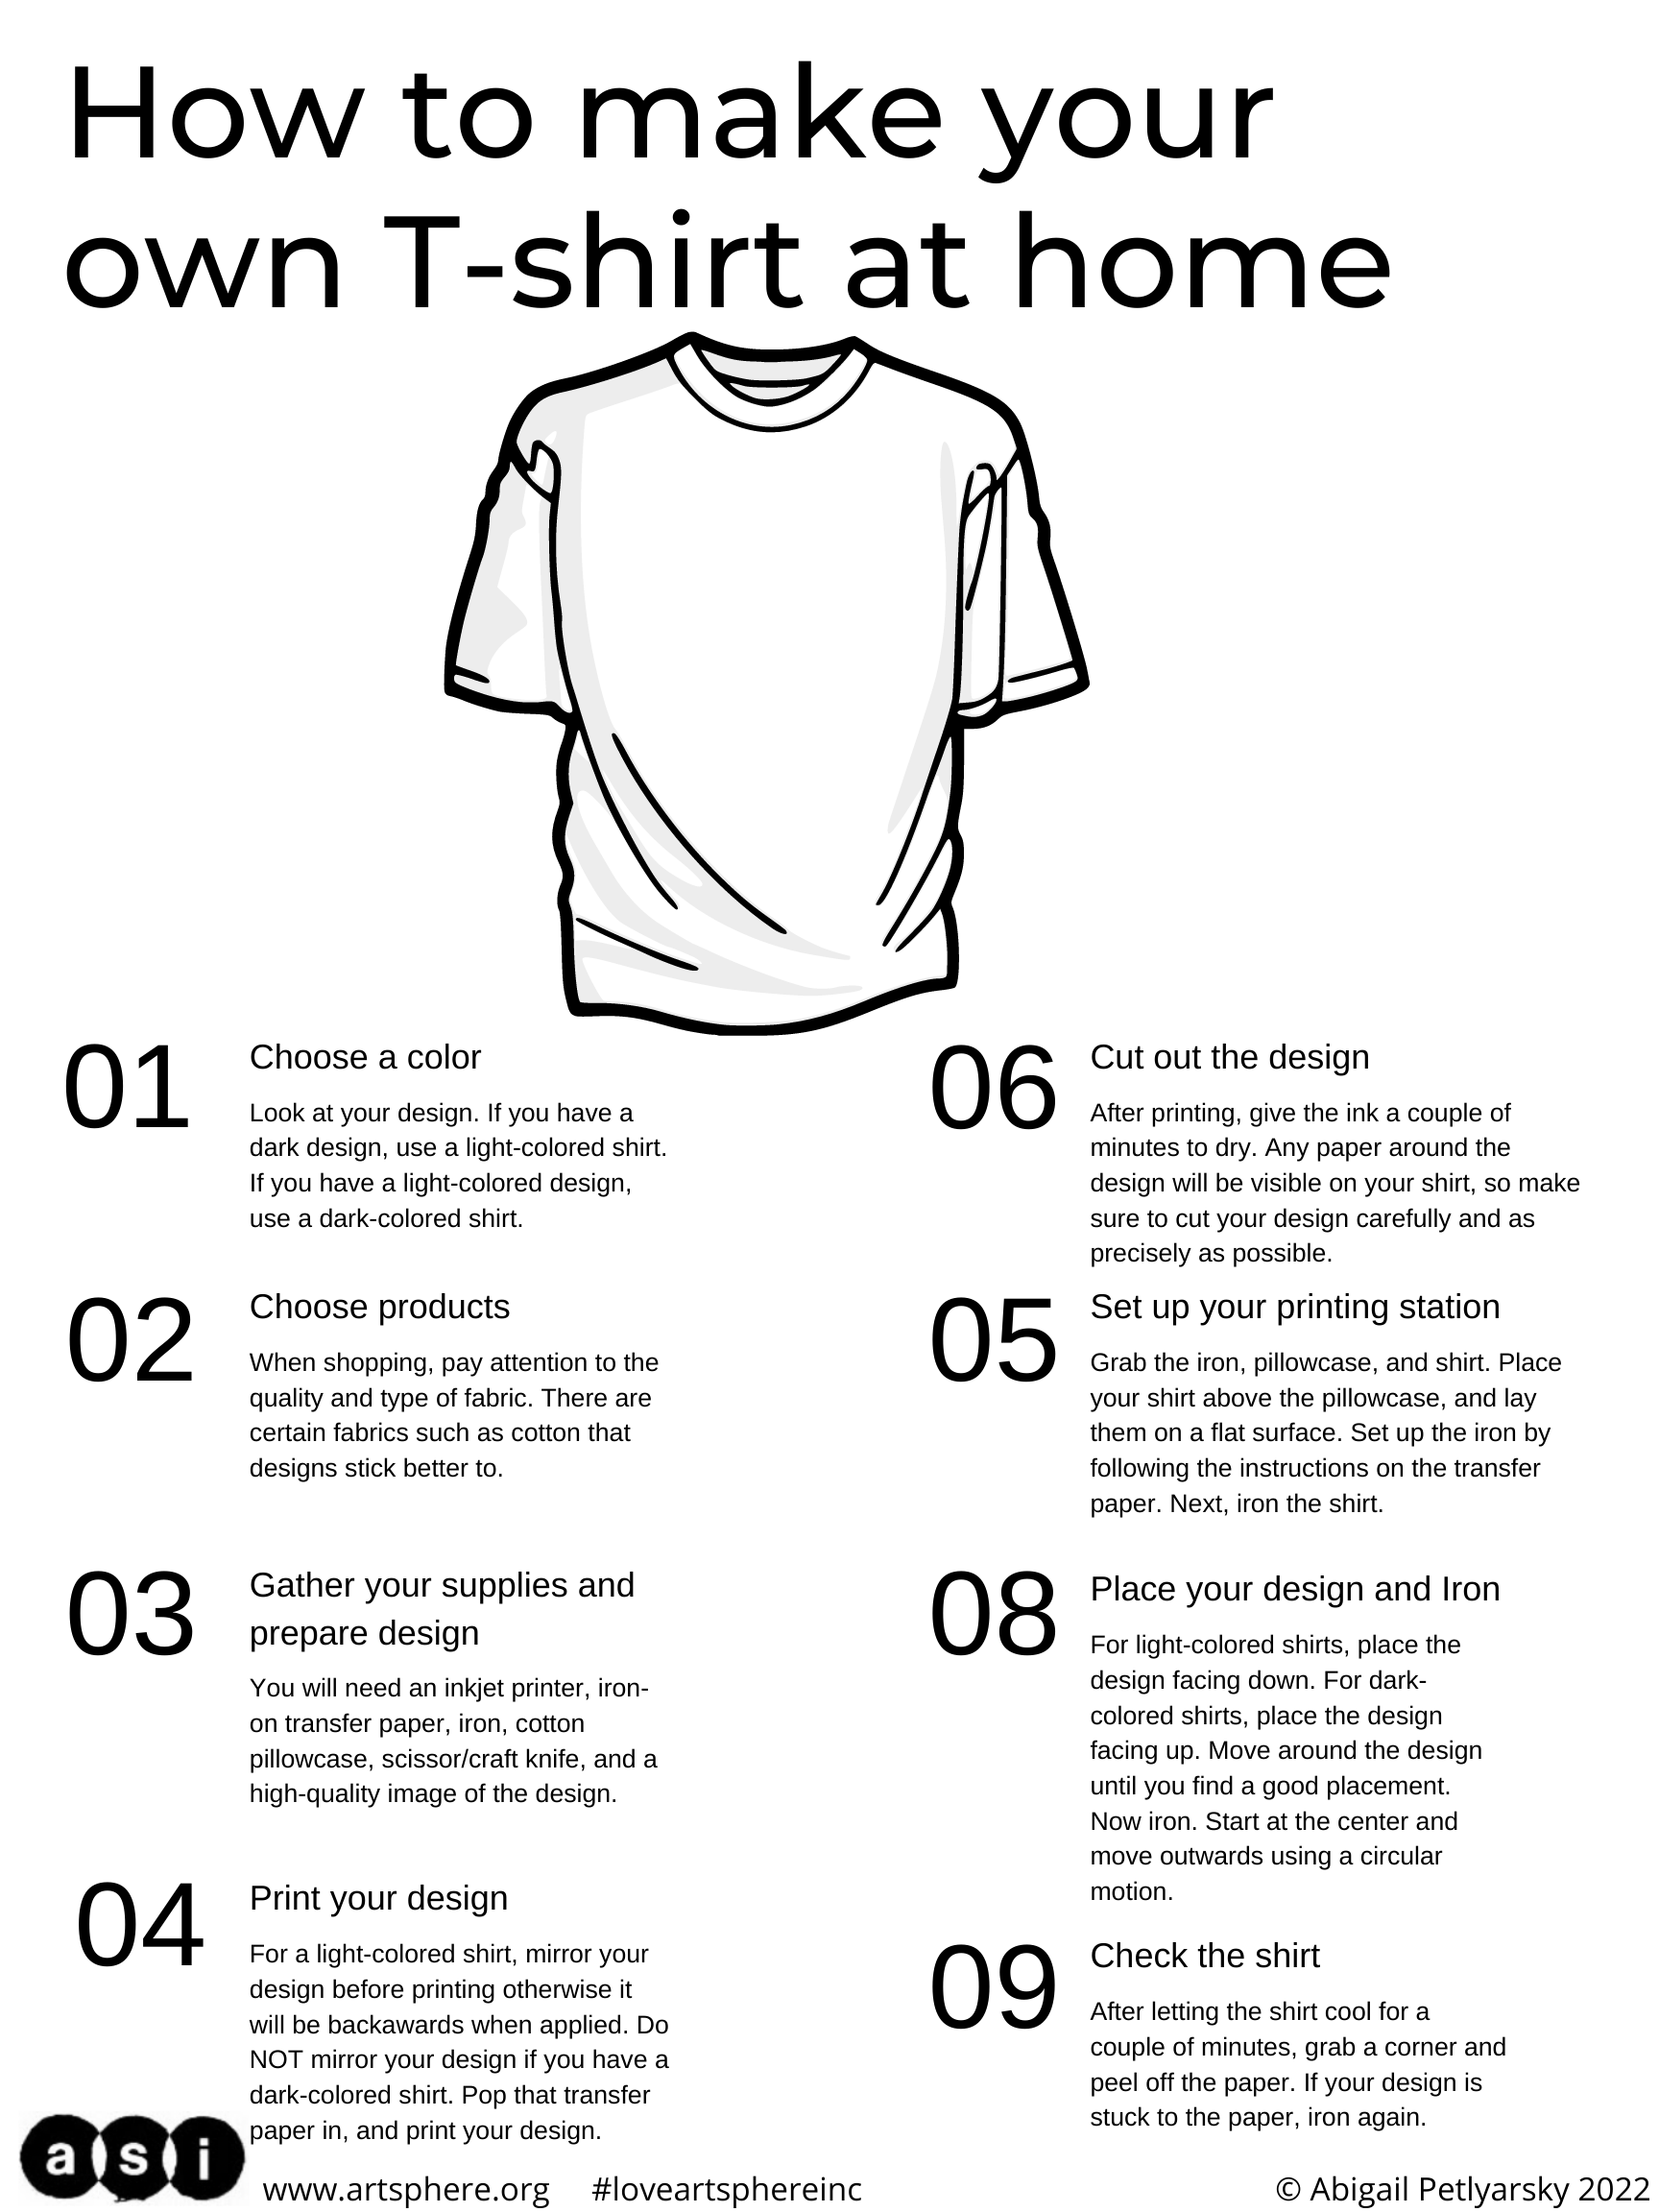 MAKE YOUR OWN T-SHIRT AT HOME | Art Sphere Inc.